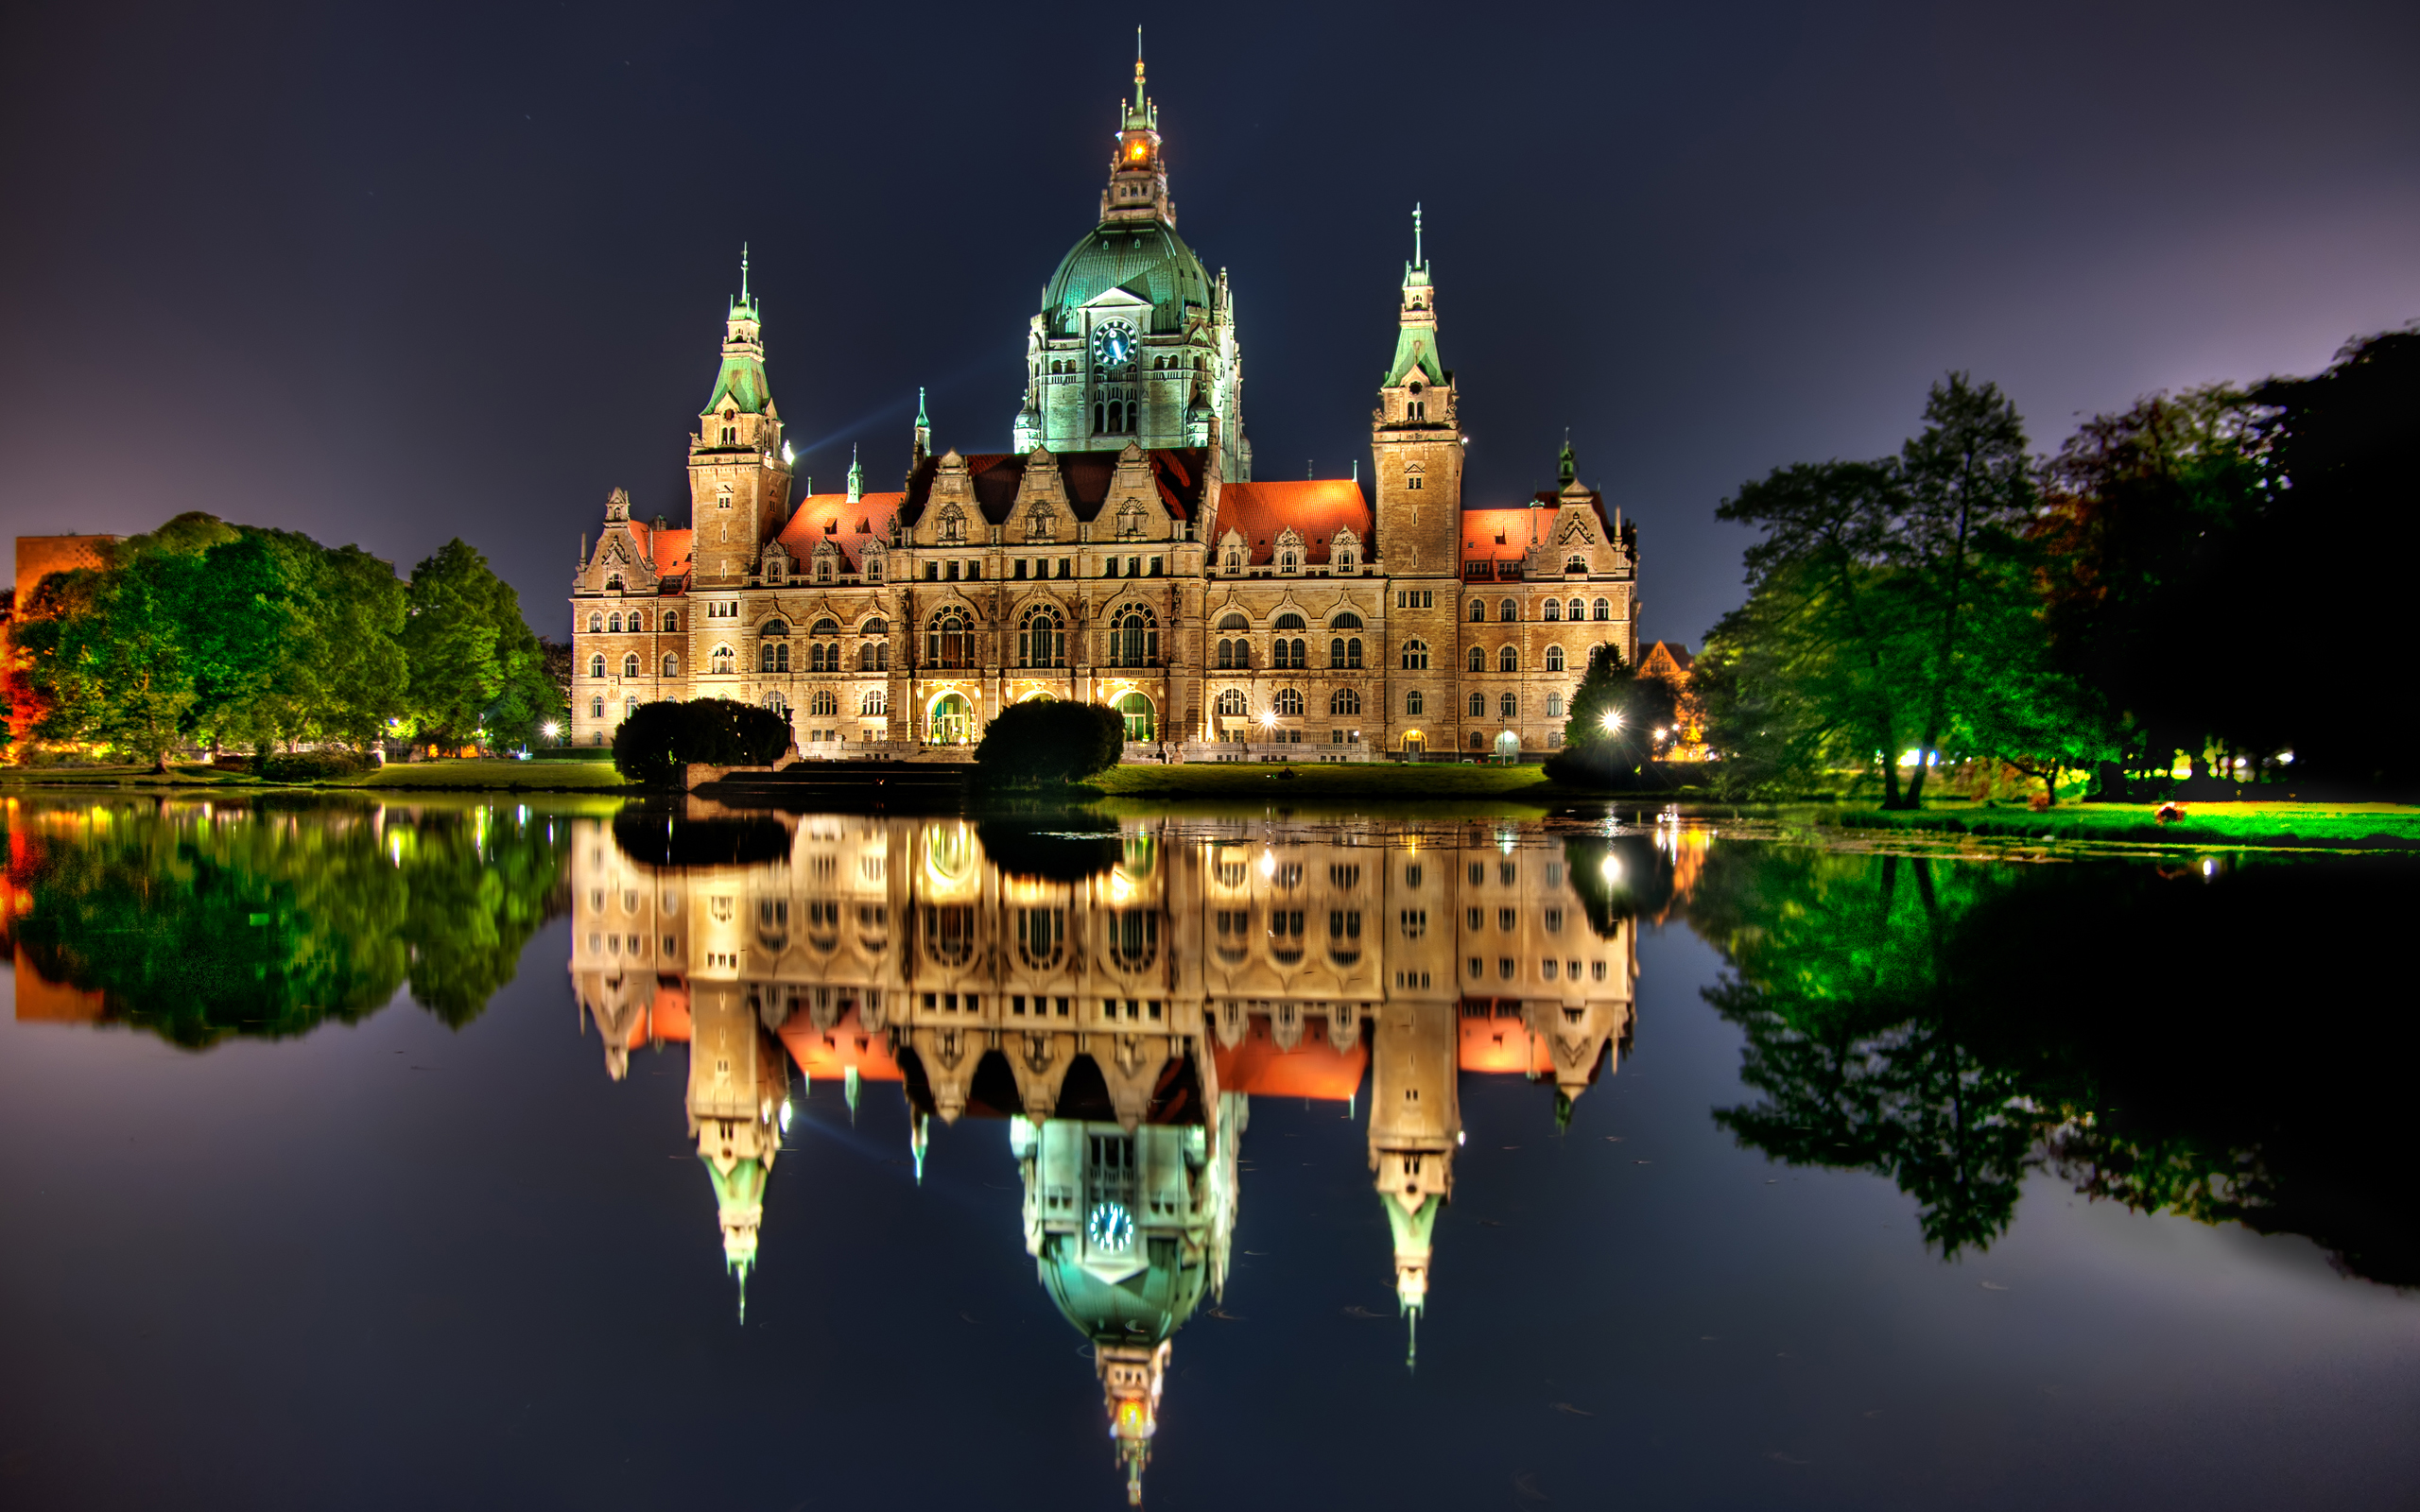 New City Hall In Hanover Germany Widescreen Wallpaper Wide